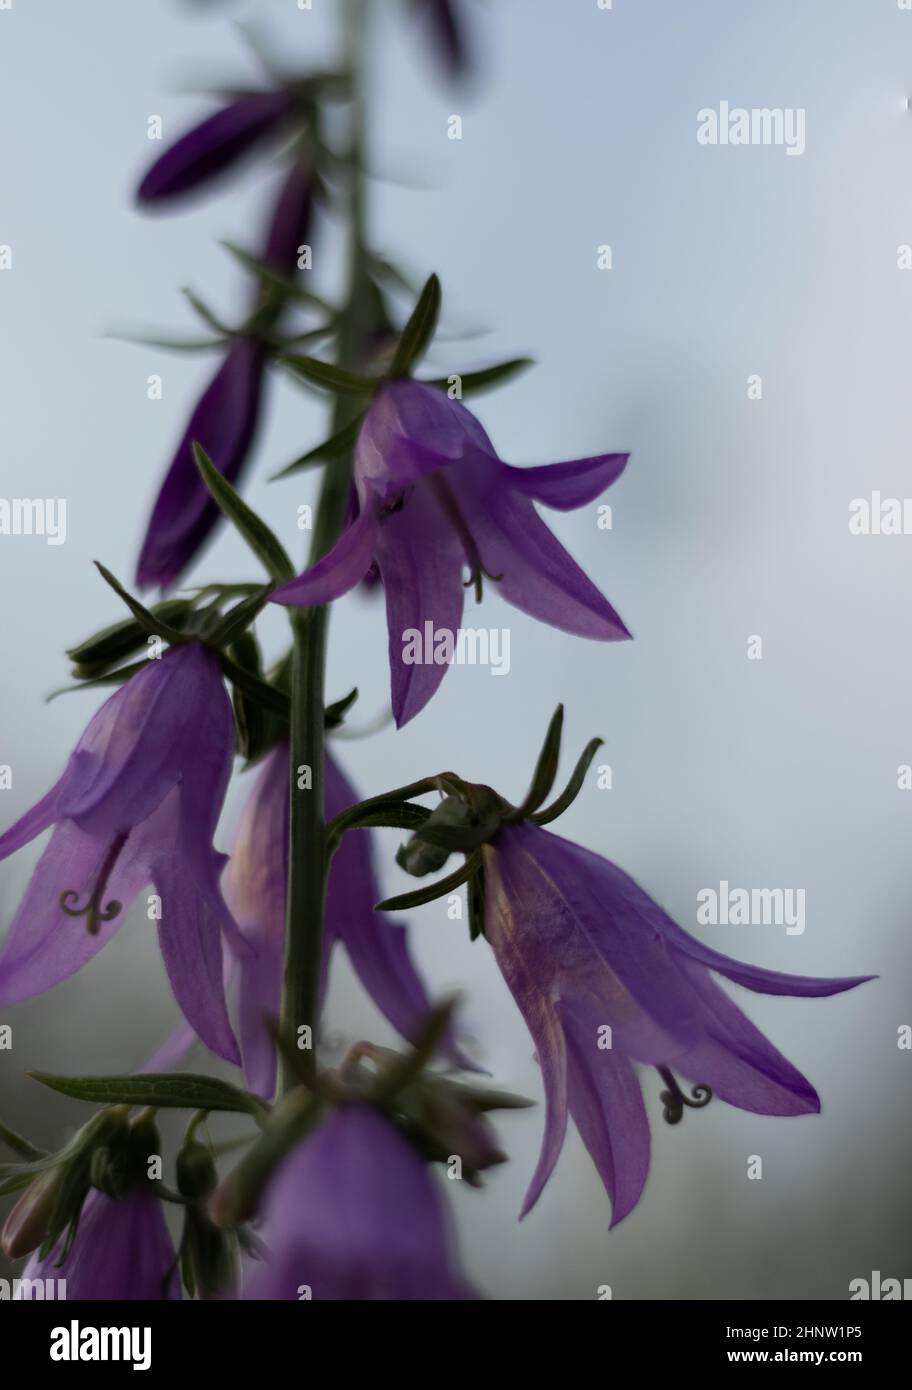 Violet Creeping Bellflower flowers on the blurred sky background. Campanula rapunculoides. Stock Photo